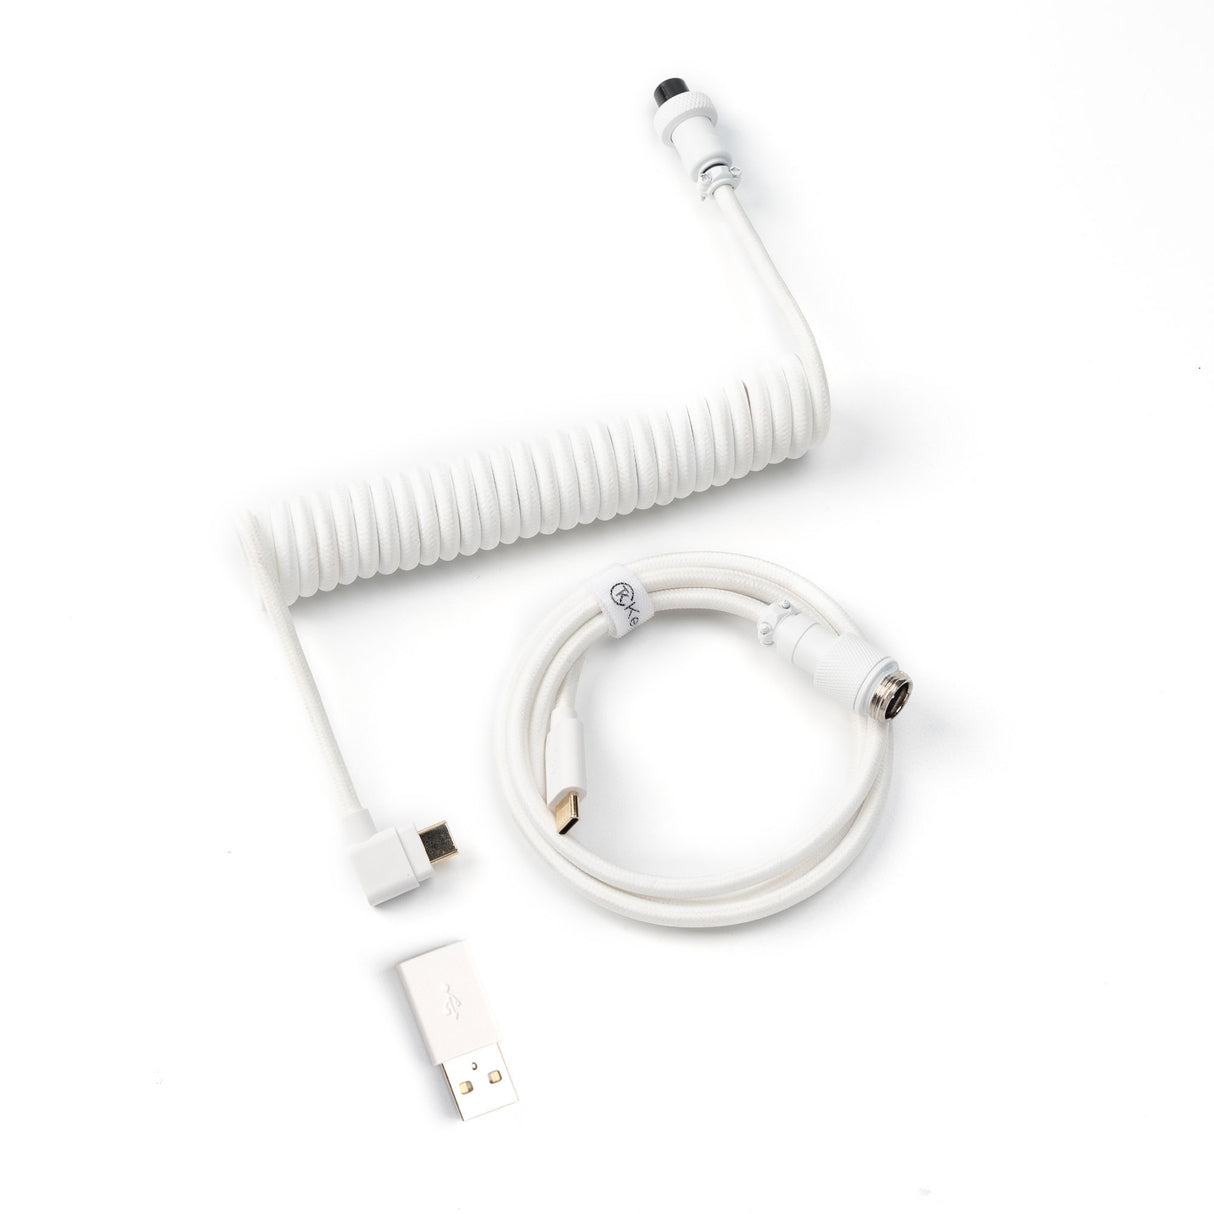 https://www.keychron.com/cdn/shop/files/Keychron-custom-coiled-aviator-USB-type-C-cable-white-color-with-angled-connector.jpg?v=1694849500&width=1214